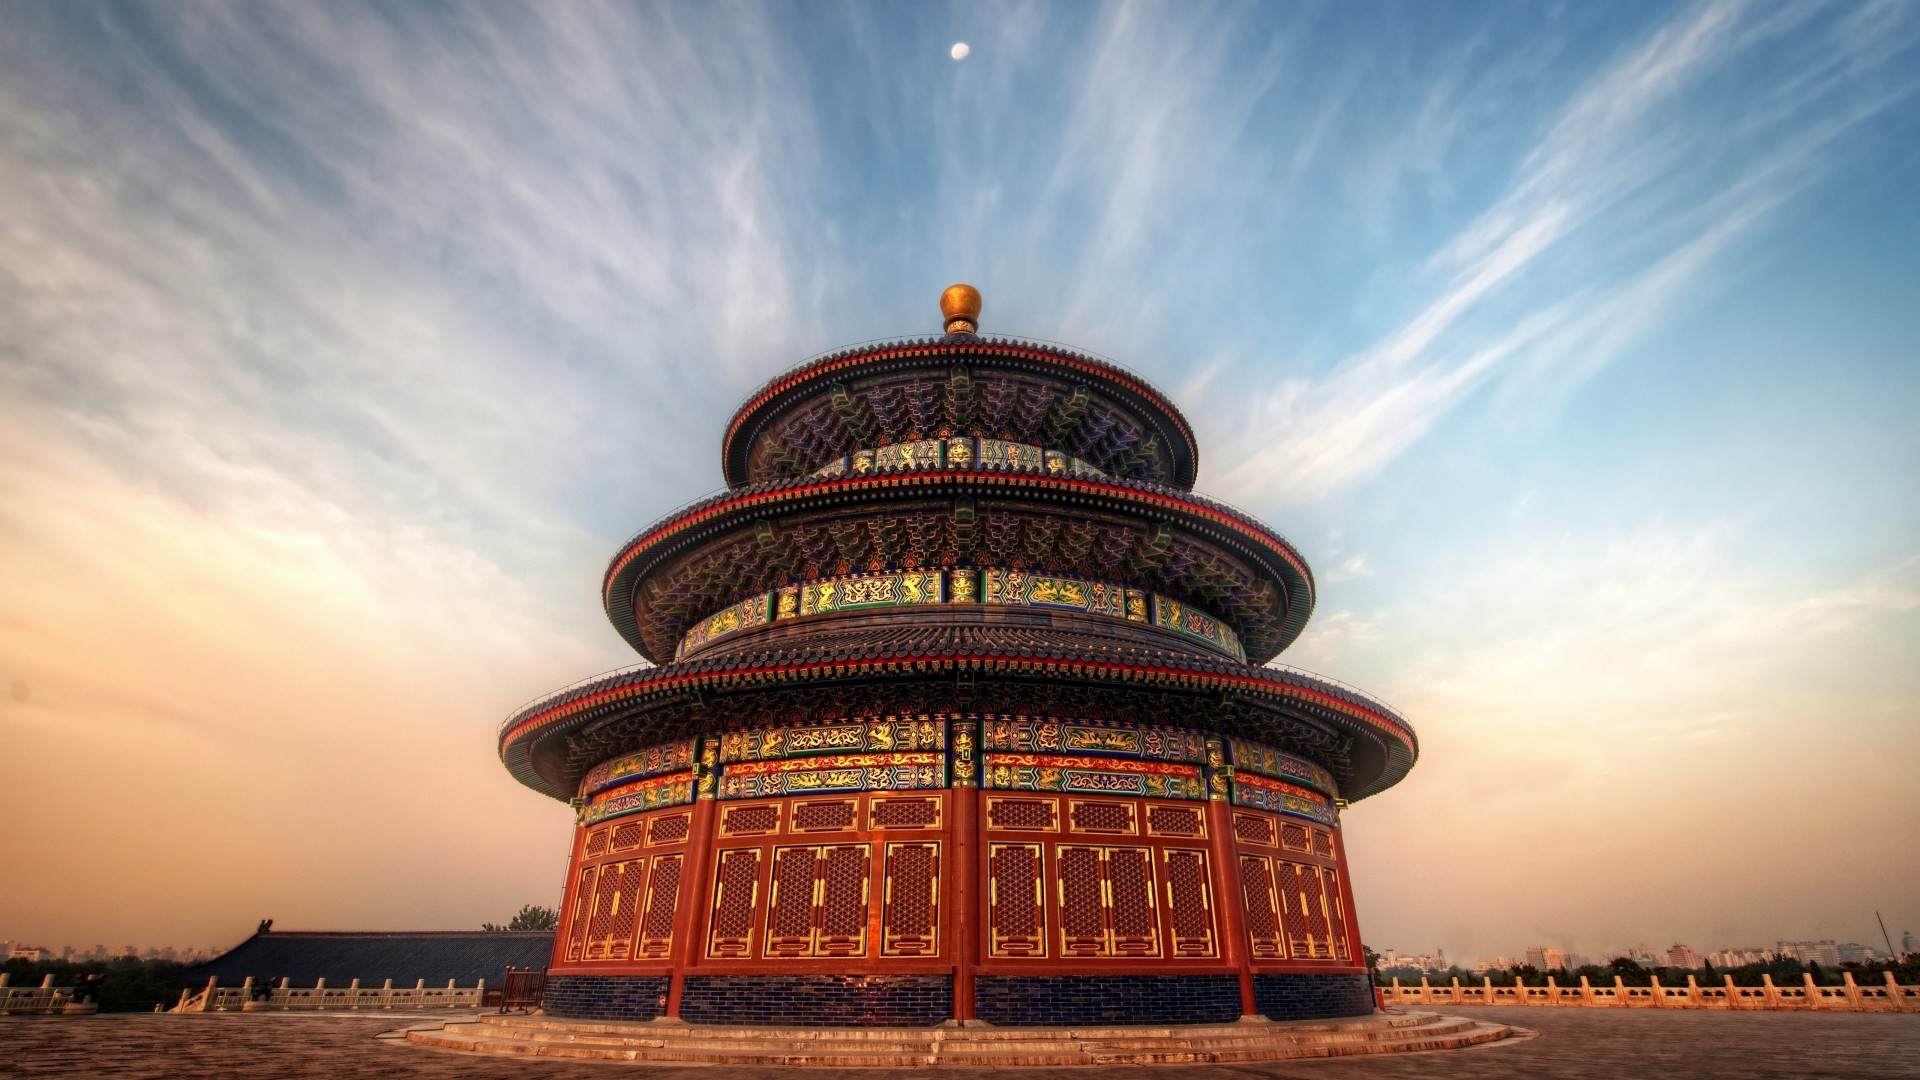 The Temple Of Heaven, China, sky, clouds, sunset, sunrise, travel, booking, vacation (horizontal)